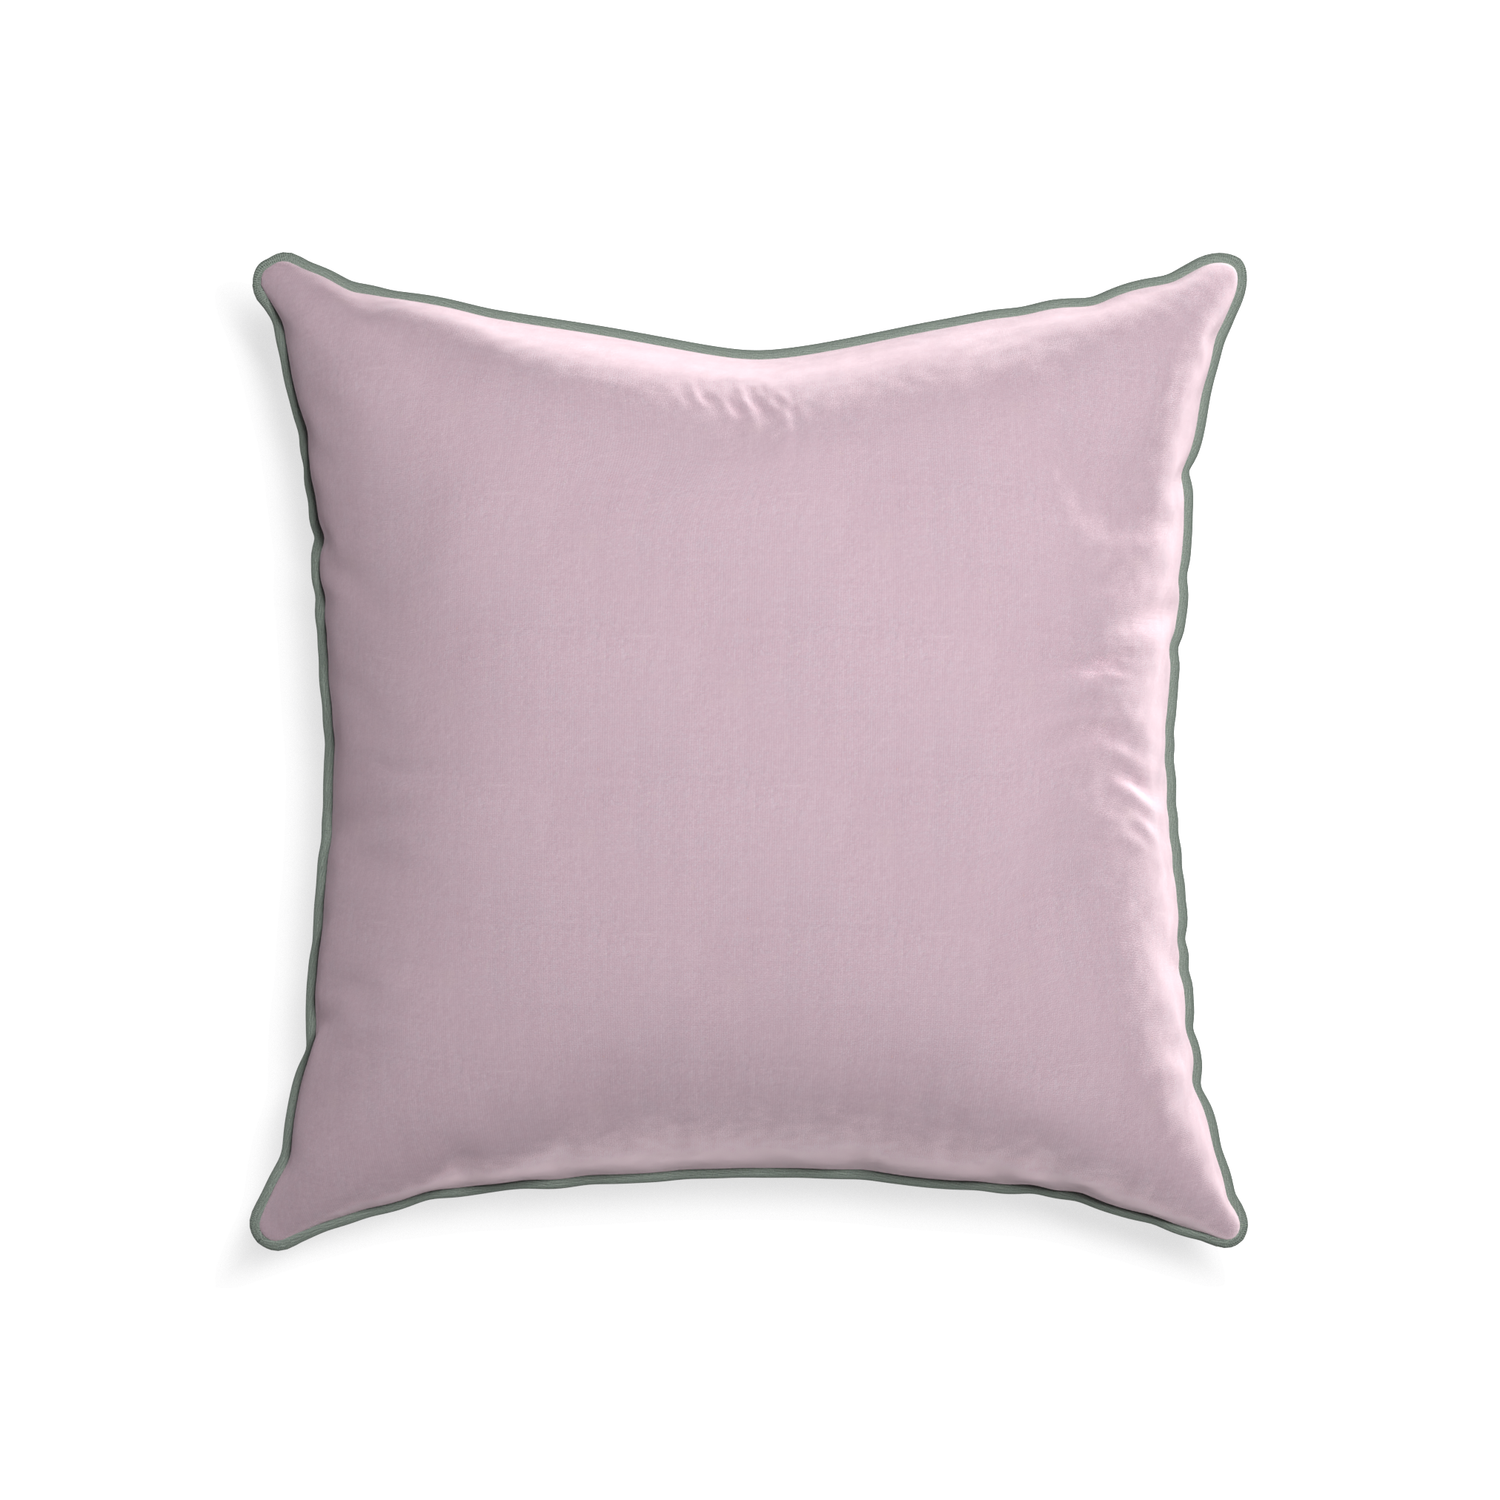 22-square lilac velvet custom lilacpillow with sage piping on white background